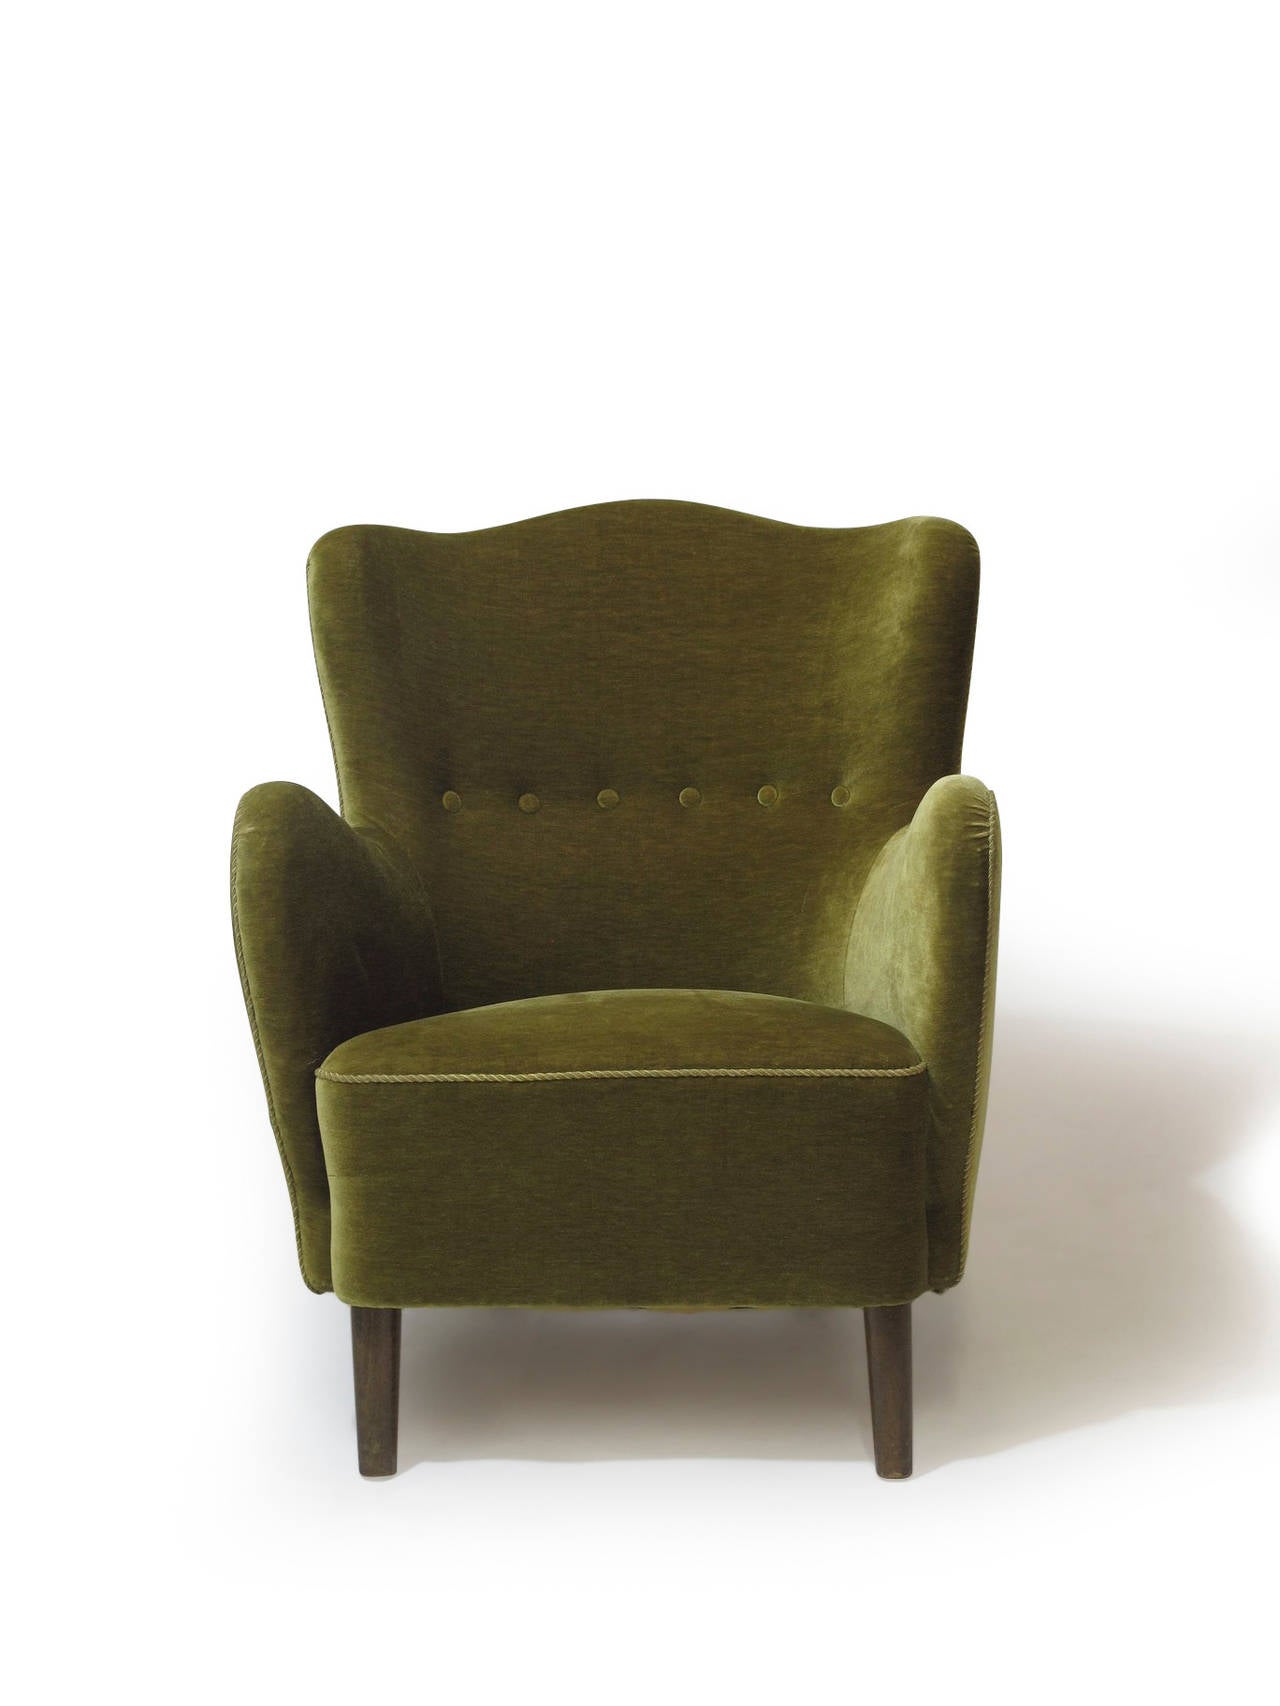 Sculptural mid century Danish lounge chairs with solid wood frame, hand tied springs, and horsehair padding. The curved back offers an excellent supportive backrest. Covered in the original olive-green mohair wool. Raised on beech legs, stained